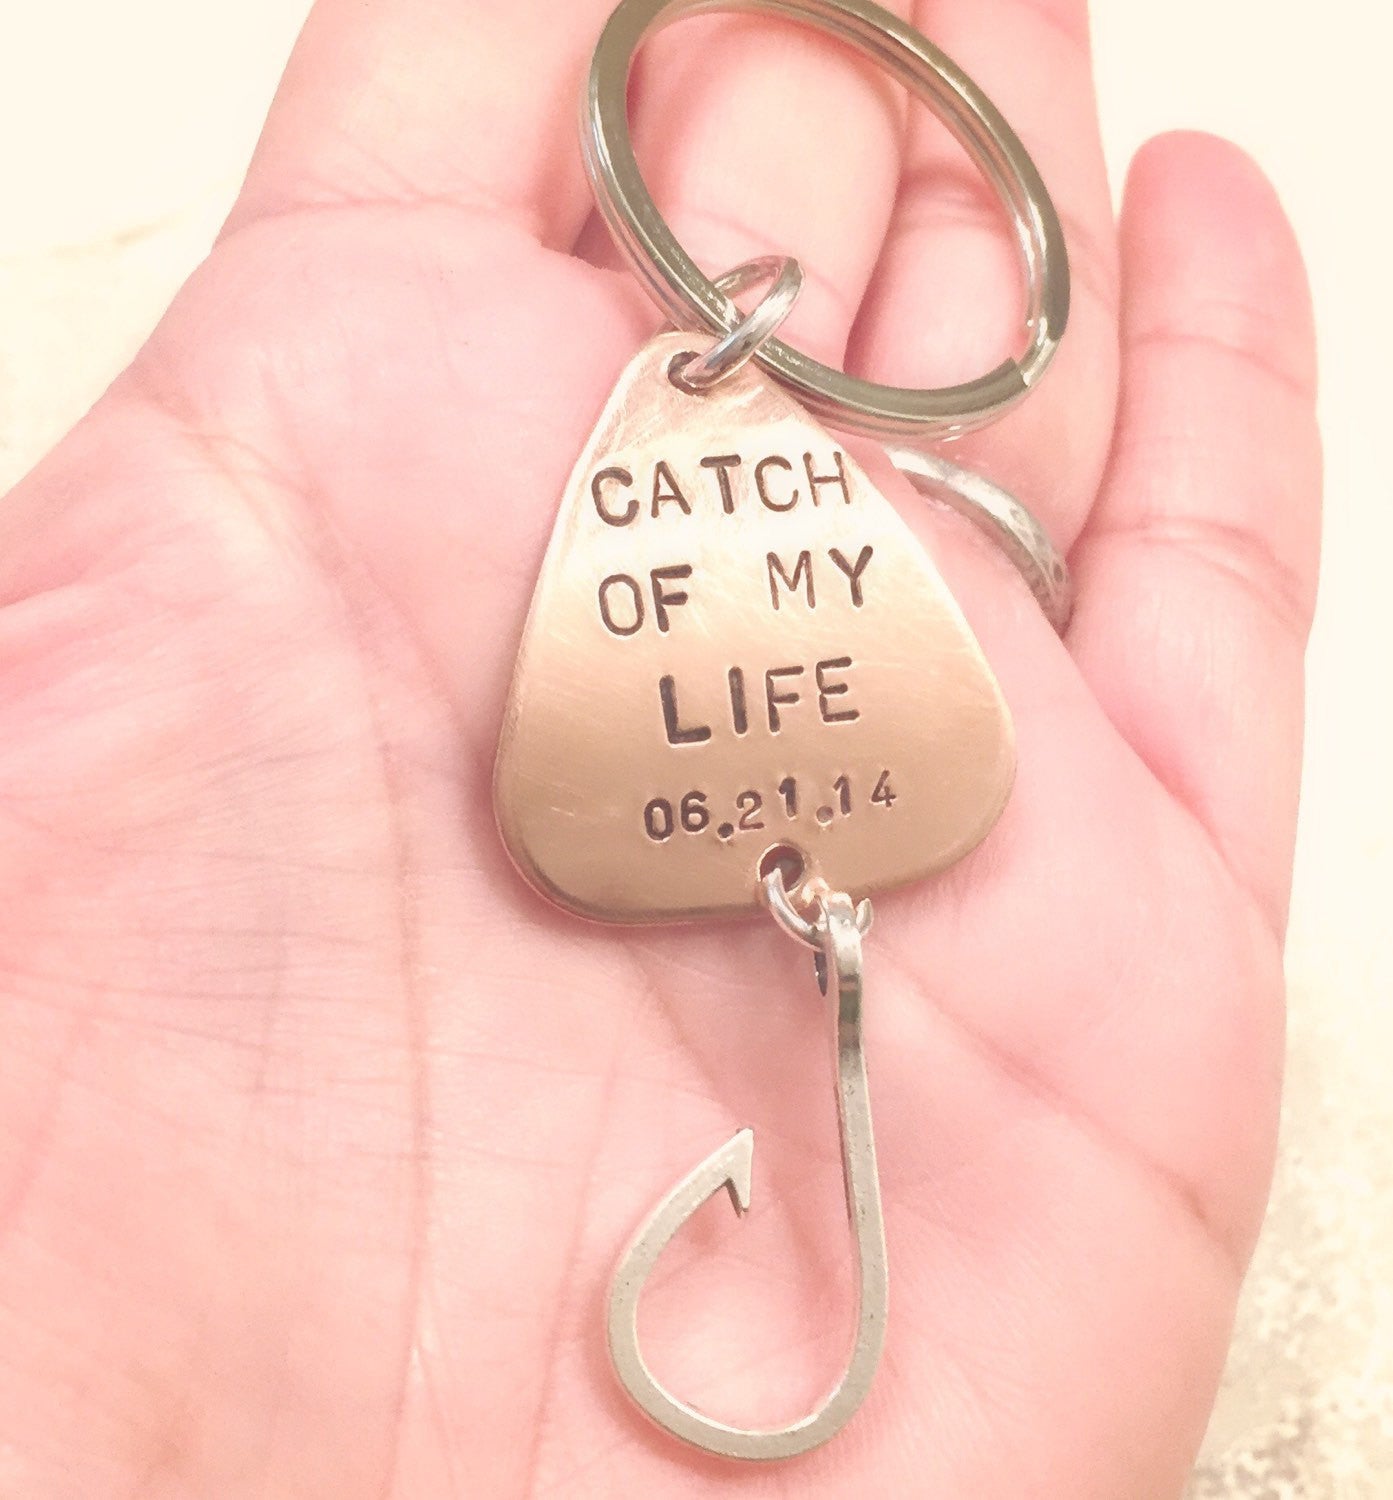 Fishing Lure Keychain, Personalized - Natashaaloha, jewelry, bracelets, necklace, keychains, fishing lures, gifts for men, charms, personalized, 